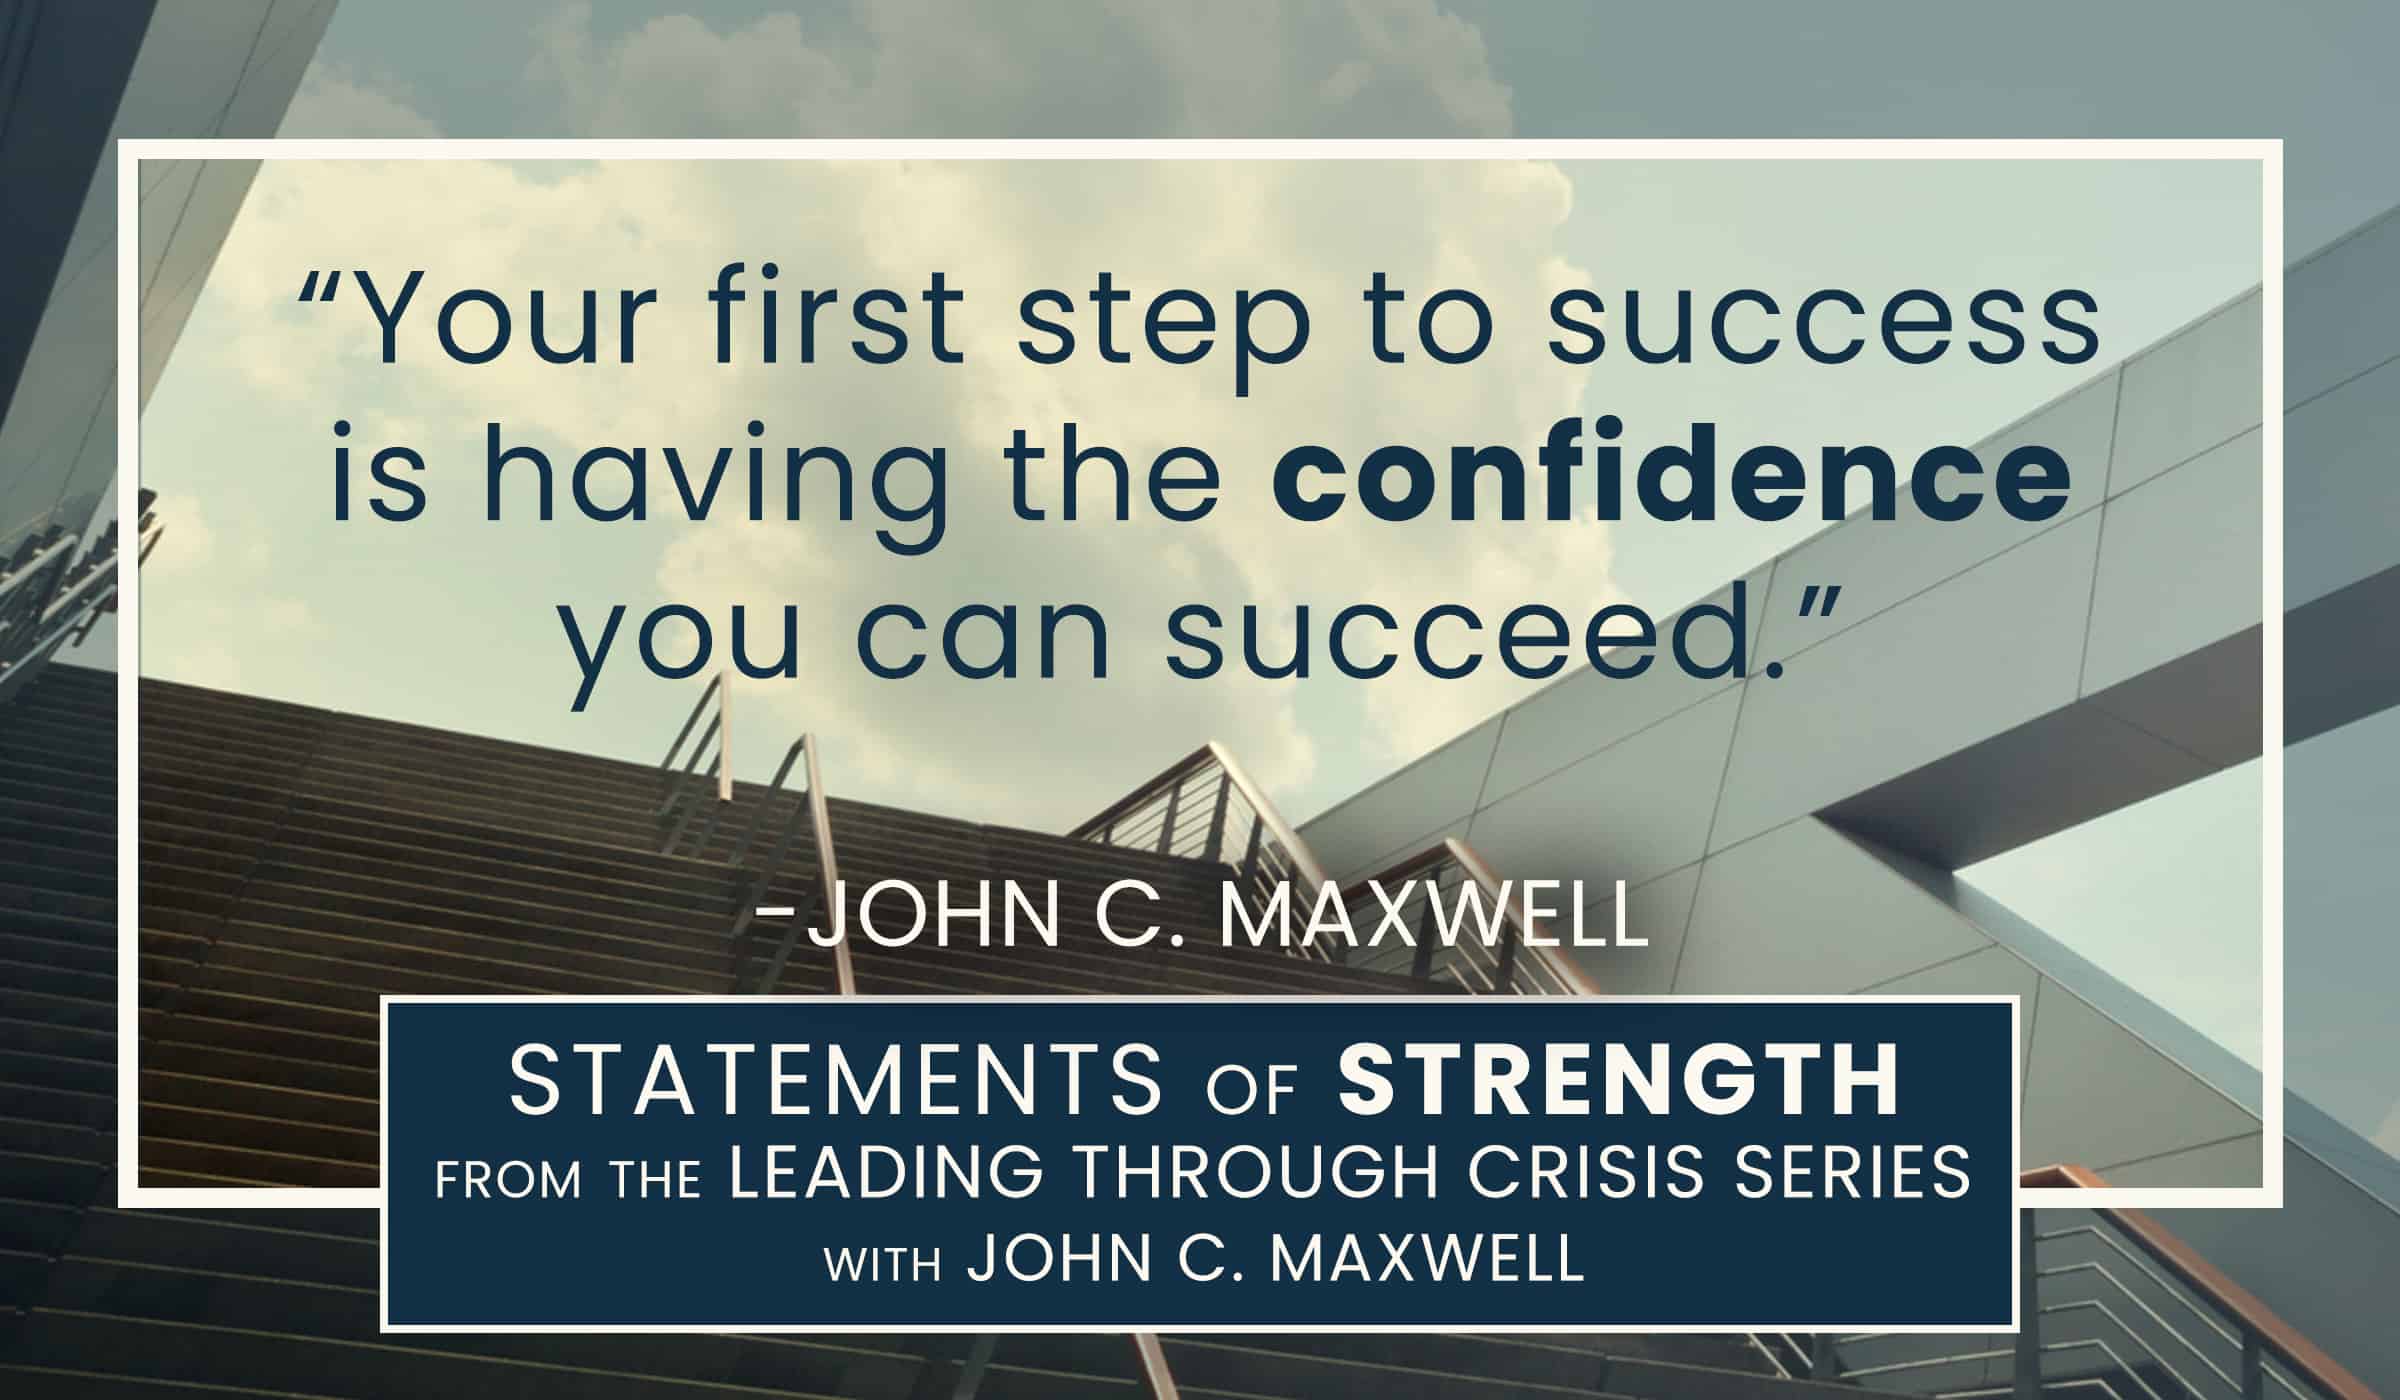 image of quote from john maxwell